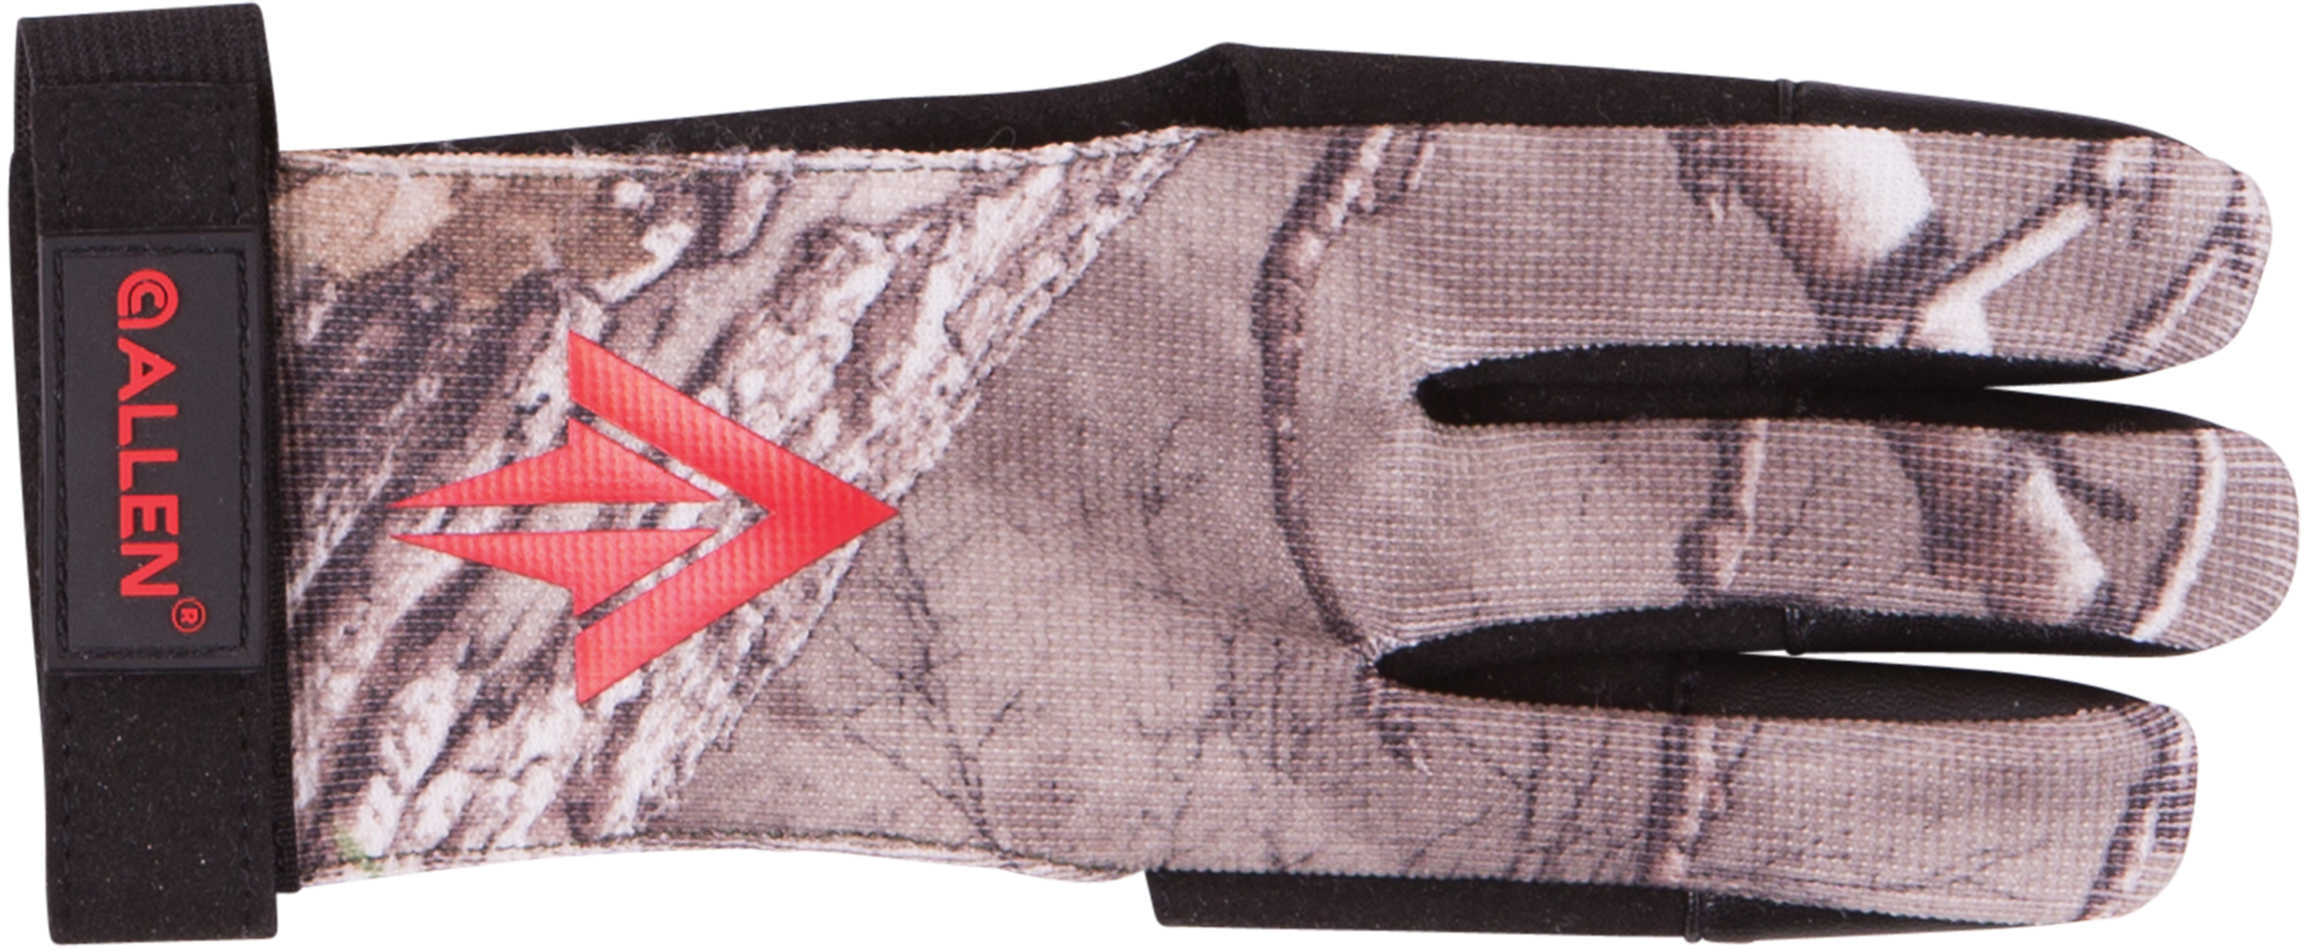 Allen Cases Ambidextrous Traditional Archery Glove Small, Realtree Xtra Md: 60535